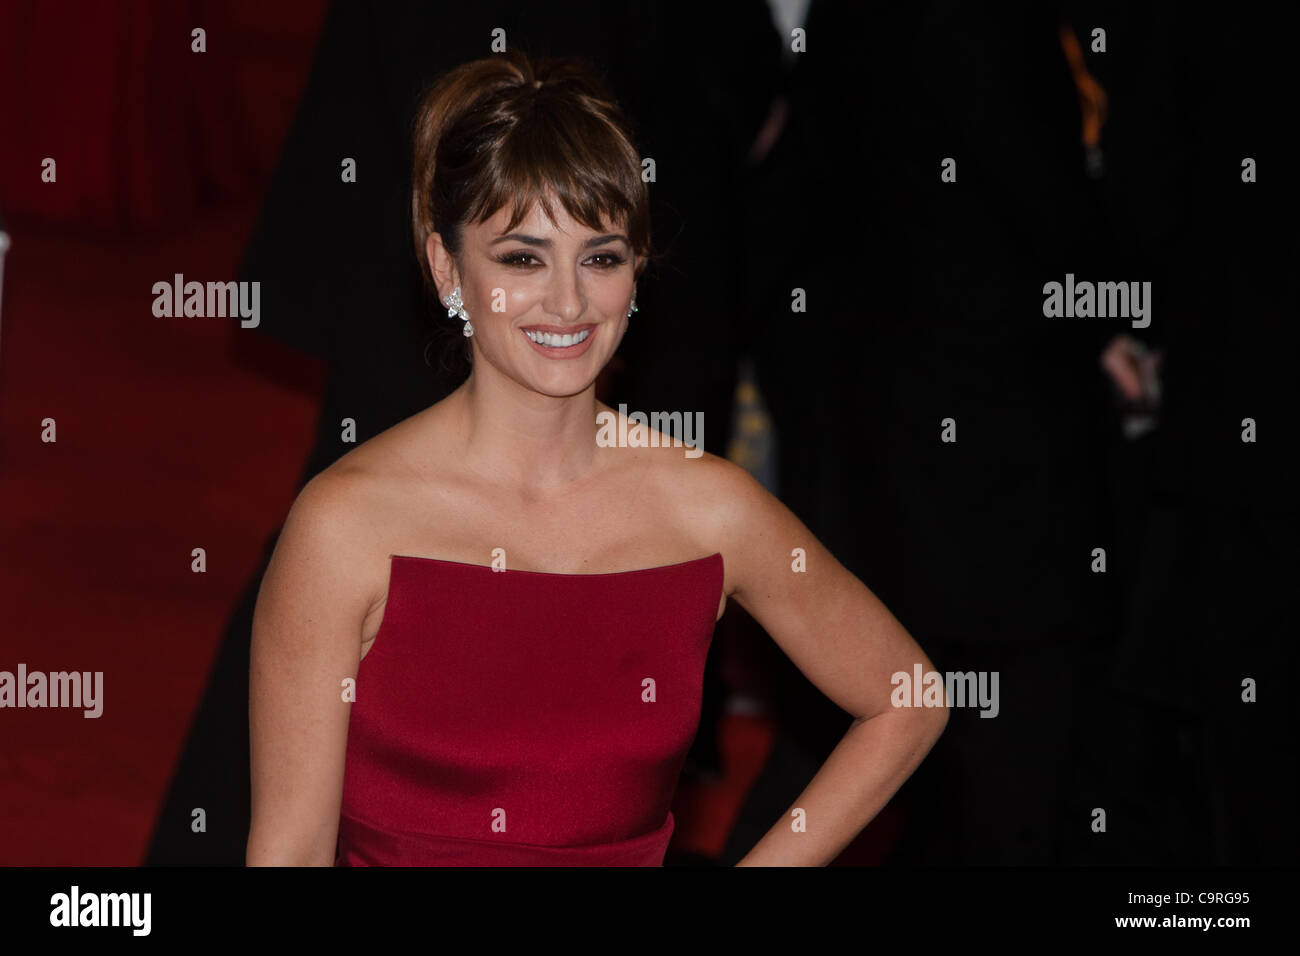 London, UK, 12/02/2012. Spanish actress Penelope Cruz, arriving on the red carpet to attend the 2012 BAFTAs Stock Photo